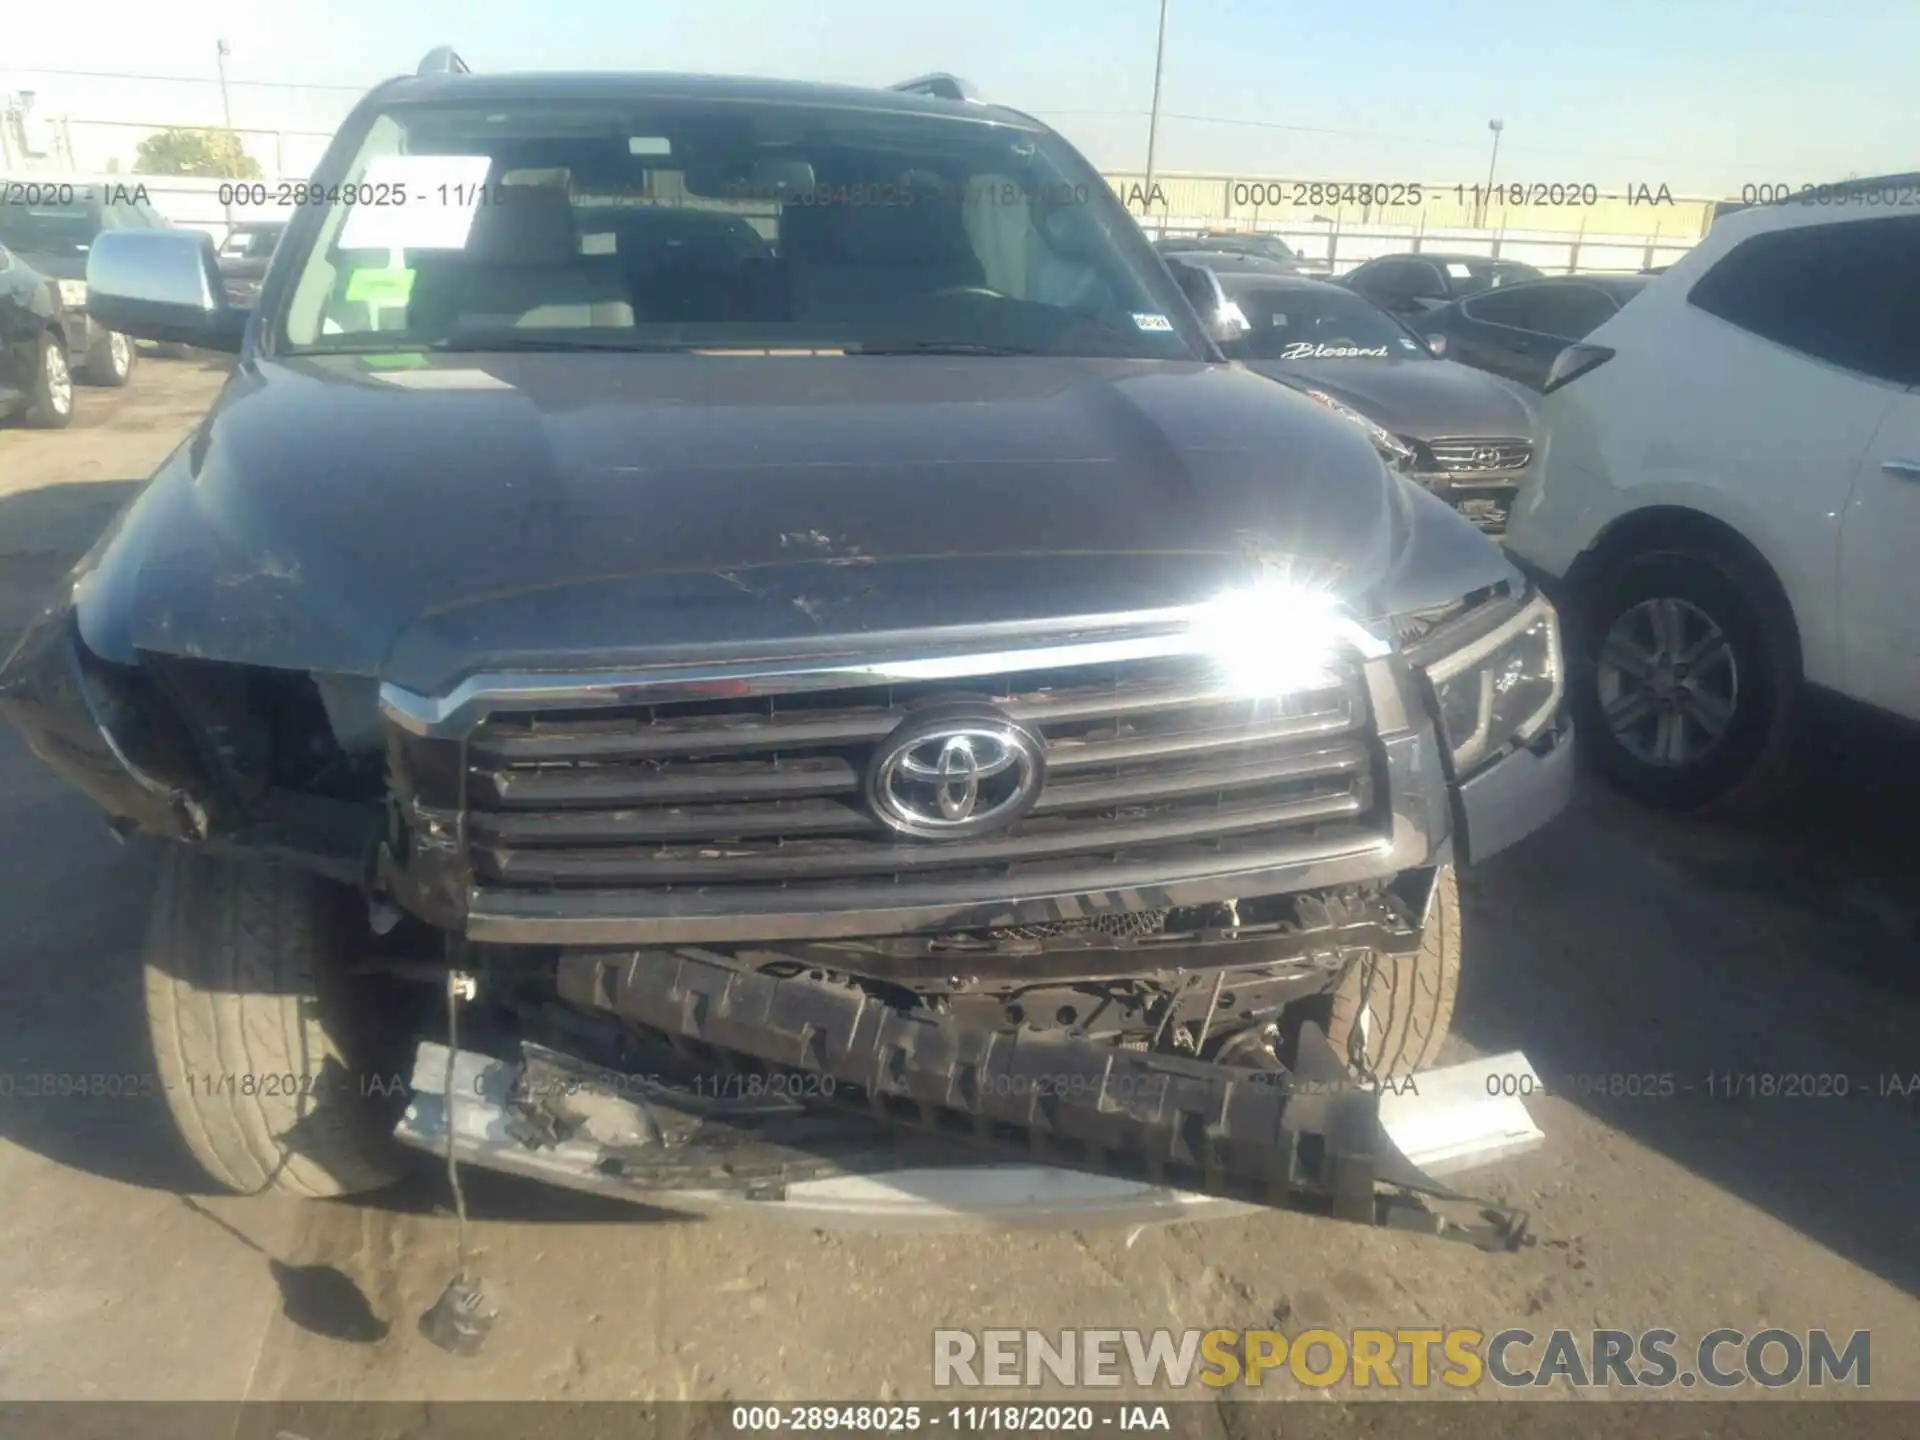 6 Photograph of a damaged car 5TDKY5G1XKS073552 TOYOTA SEQUOIA 2019